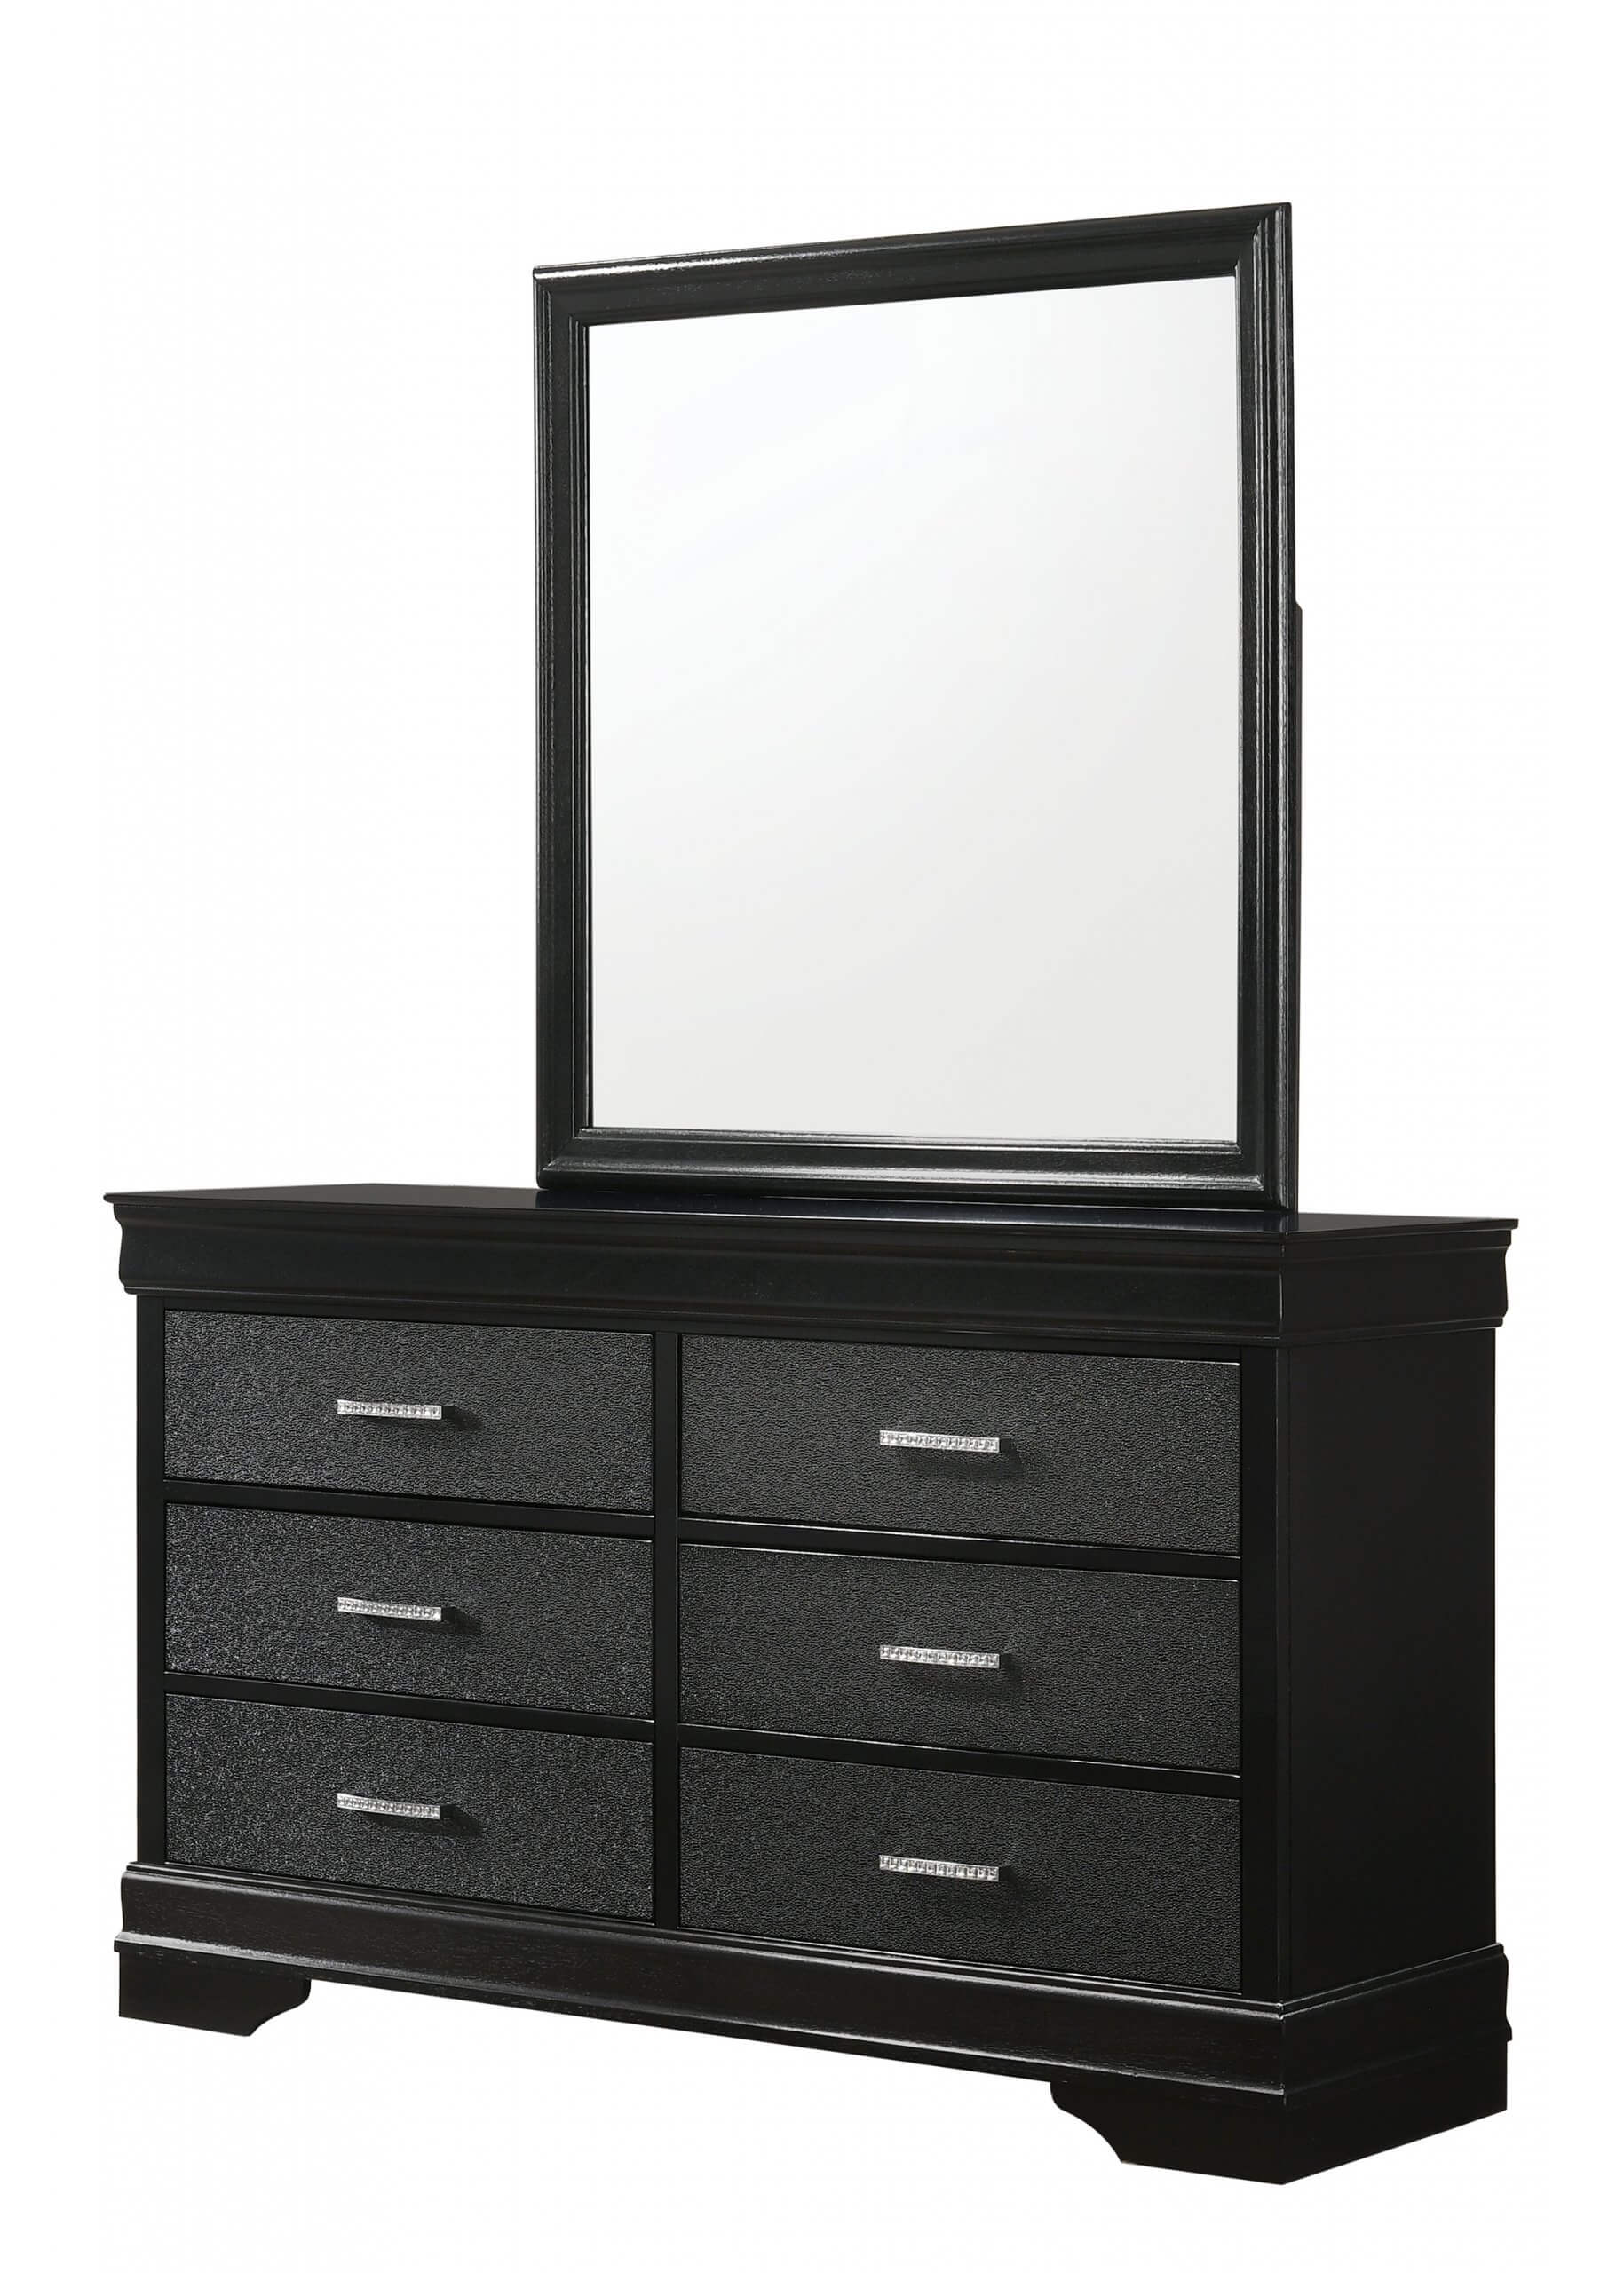 Transitional 4pc Two-Tone Textured Black Finish Crushed Velvet Fabric Twin Size Sleigh Bed Set Dresser Mirror Nightstand - image 2 of 3